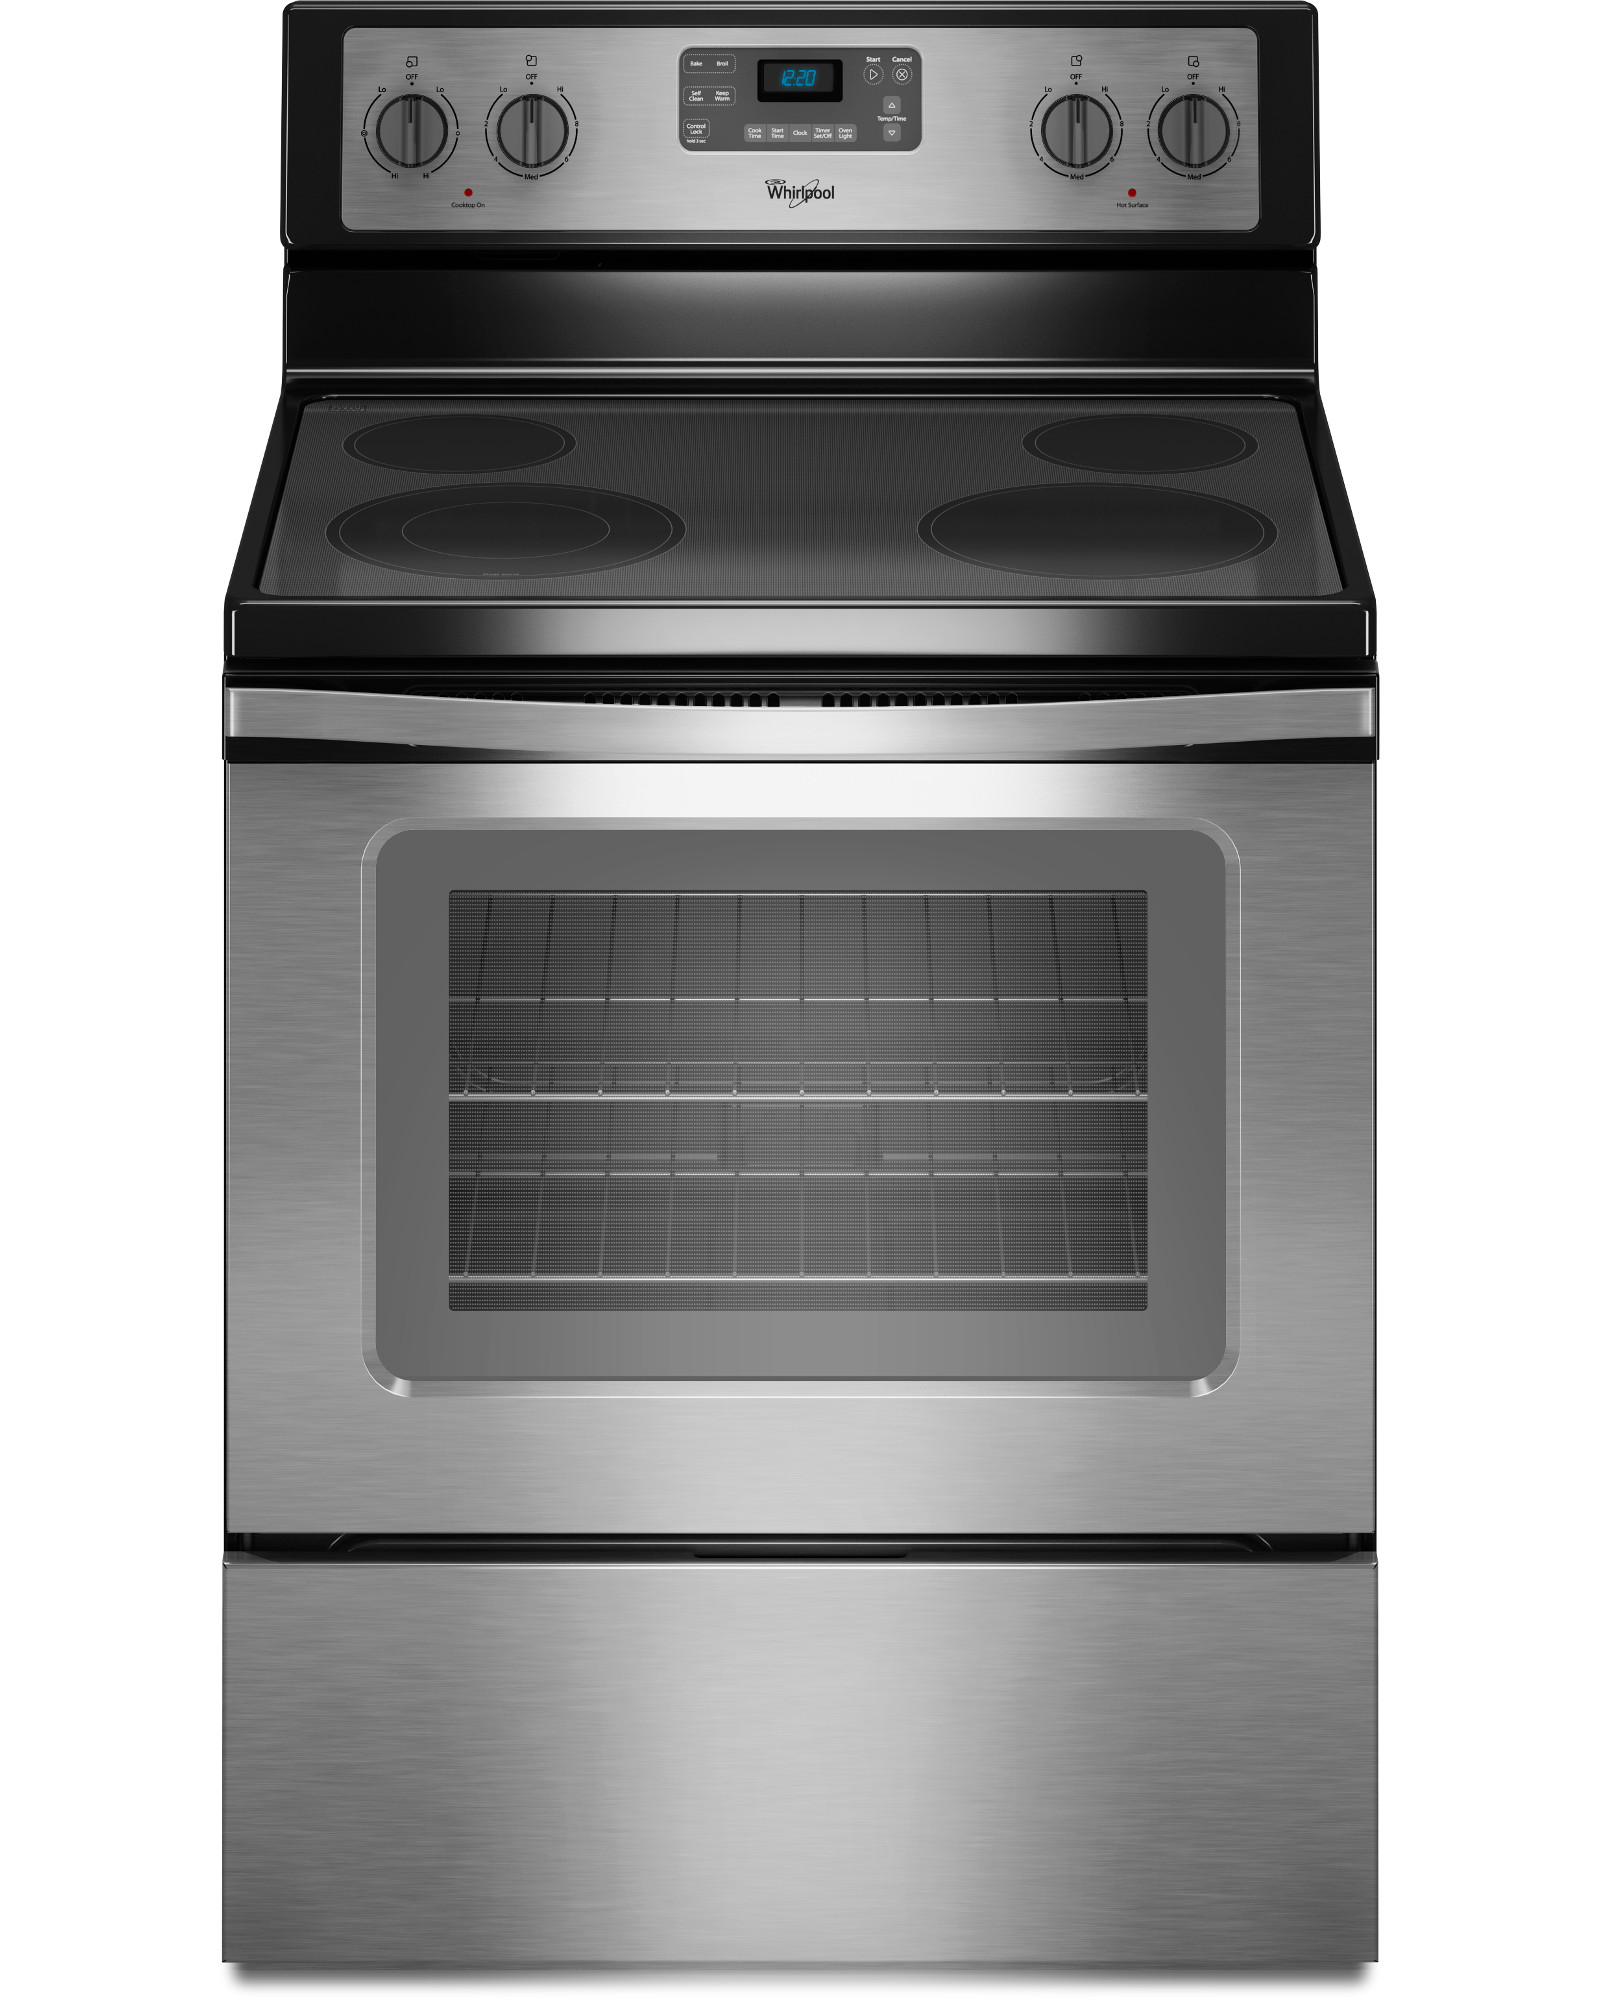 How do you know if your Whirlpool stove is being recalled?